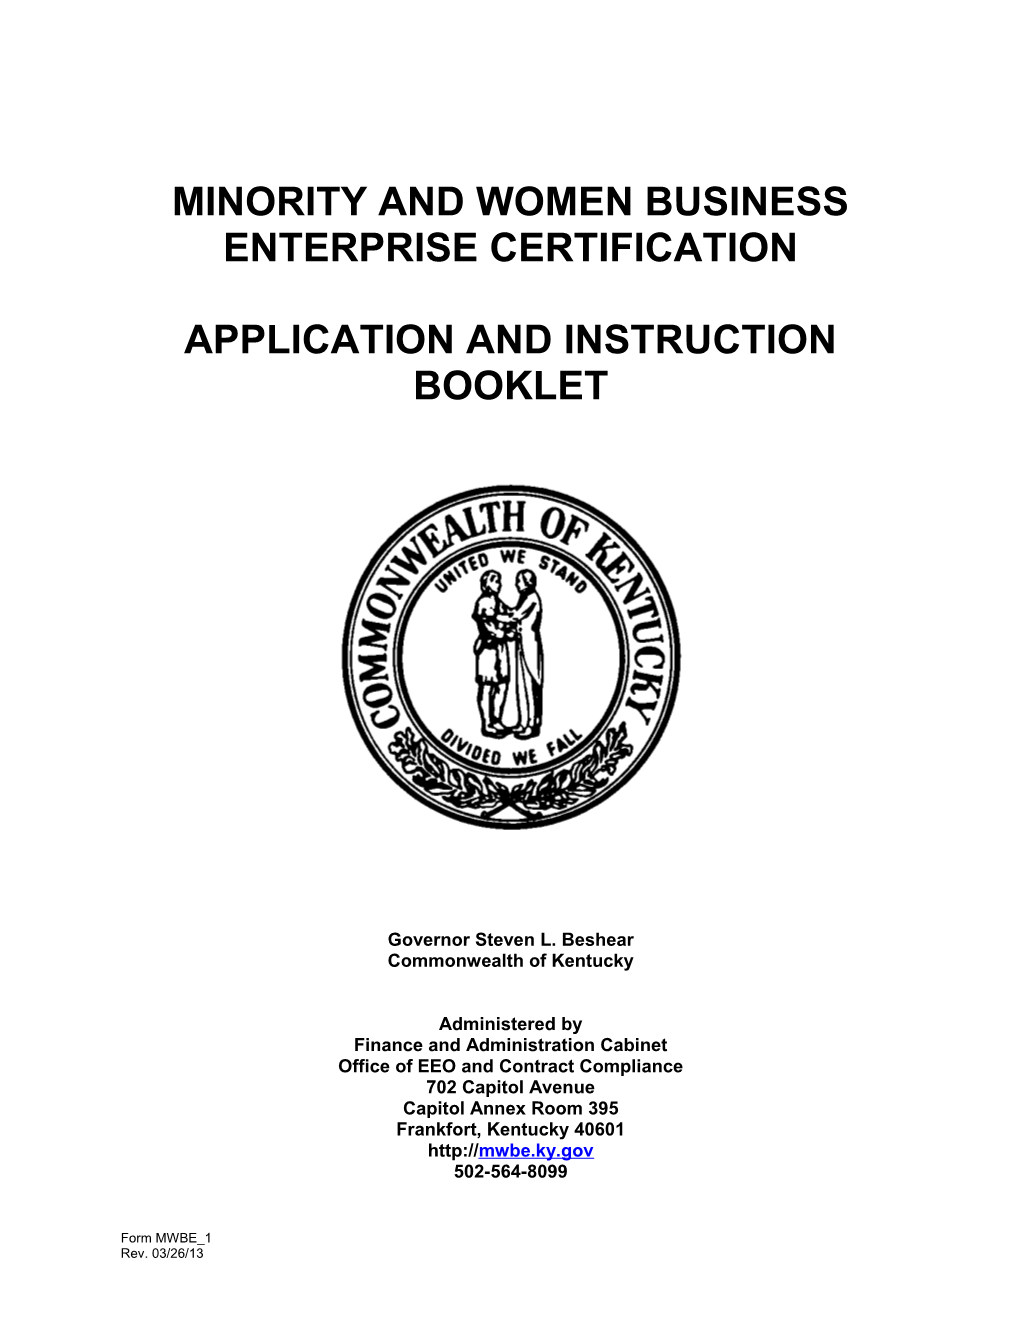 MWBE Certification Application